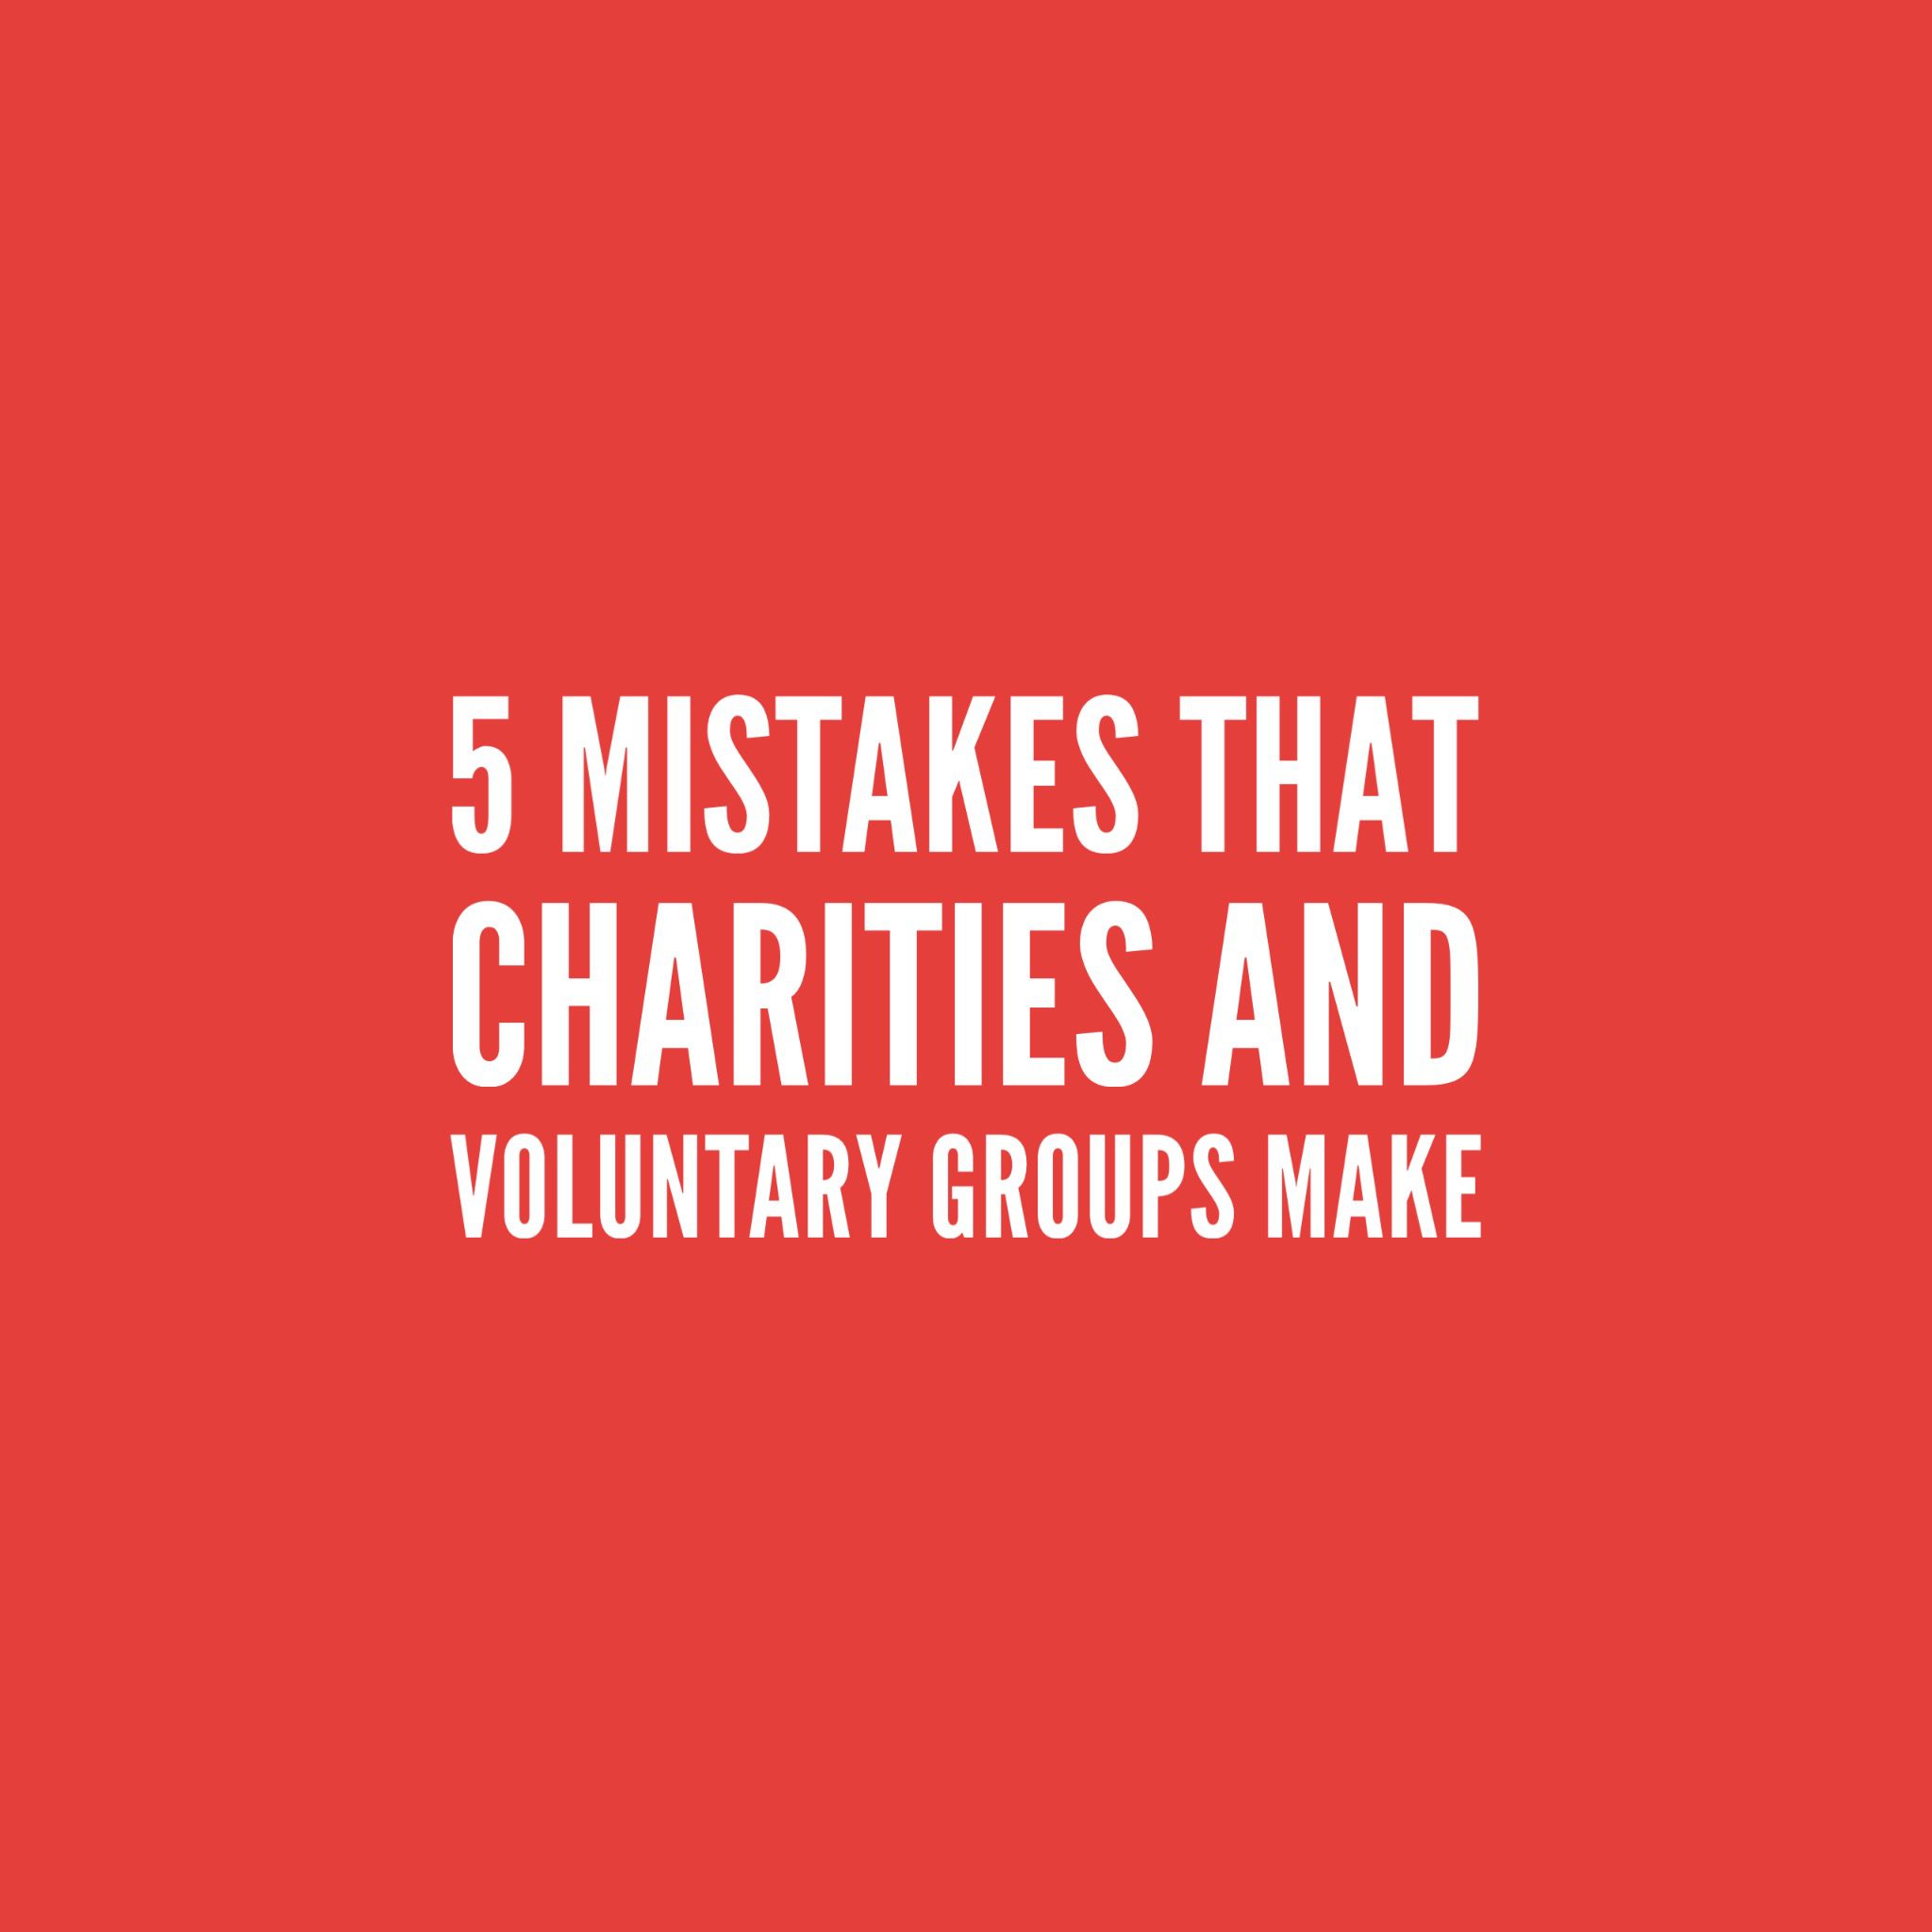 5 Mistakes That Charities and Voluntary Groups Make (and how to fix them)